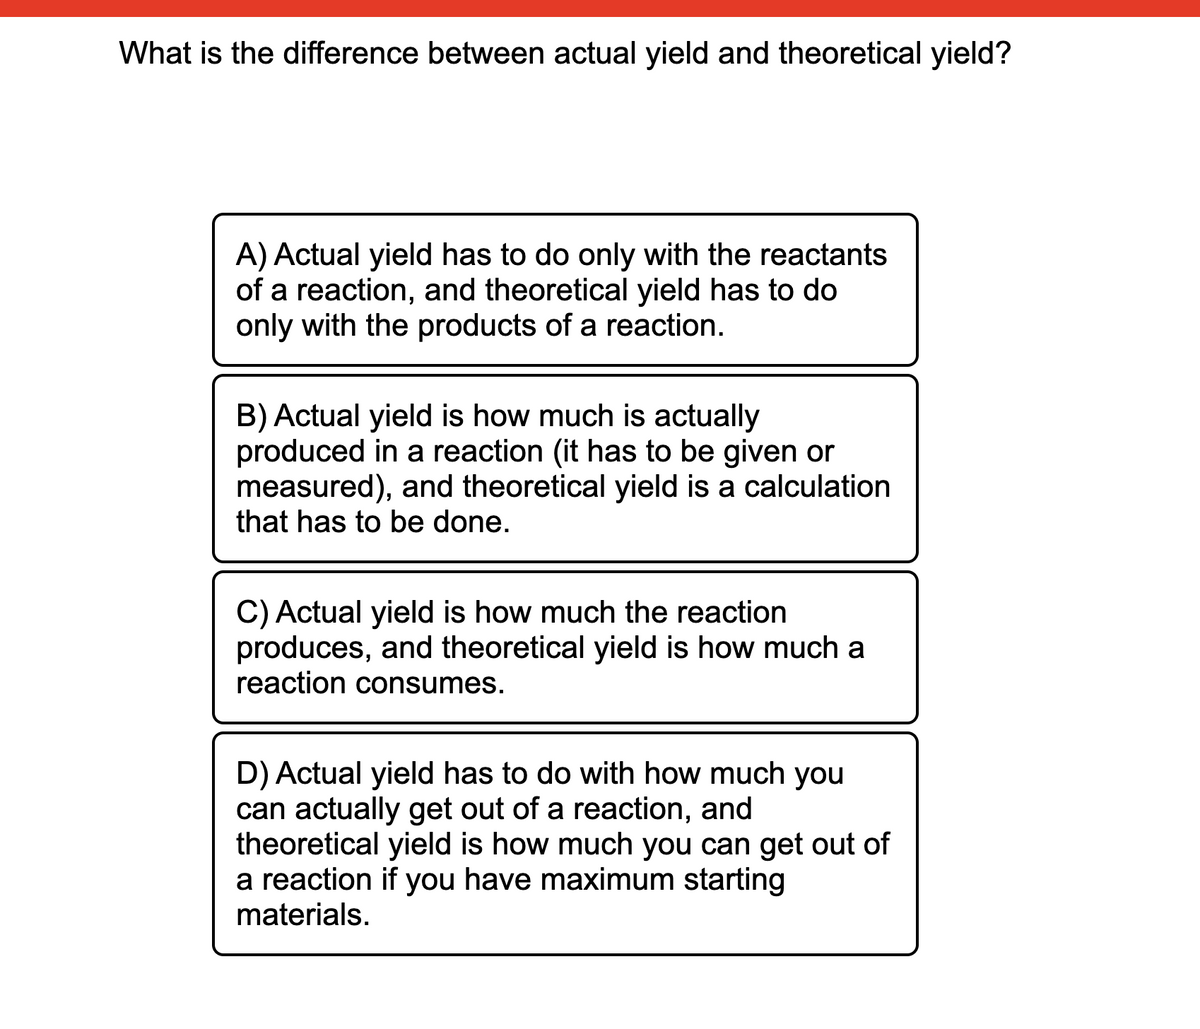 What is the difference between actual yield and theoretical yield?
A) Actual yield has to do only with the reactants
of a reaction, and theoretical yield has to do
only with the products of a reaction.
B) Actual yield is how much is actually
produced in a reaction (it has to be given or
measured), and theoretical yield is a calculation
that has to be done.
C) Actual yield is how much the reaction
produces, and theoretical yield is how much a
reaction consumes.
D) Actual yield has to do with how much you
can actually get out of a reaction, and
theoretical yield is how much you can get out of
a reaction if you have maximum starting
materials.